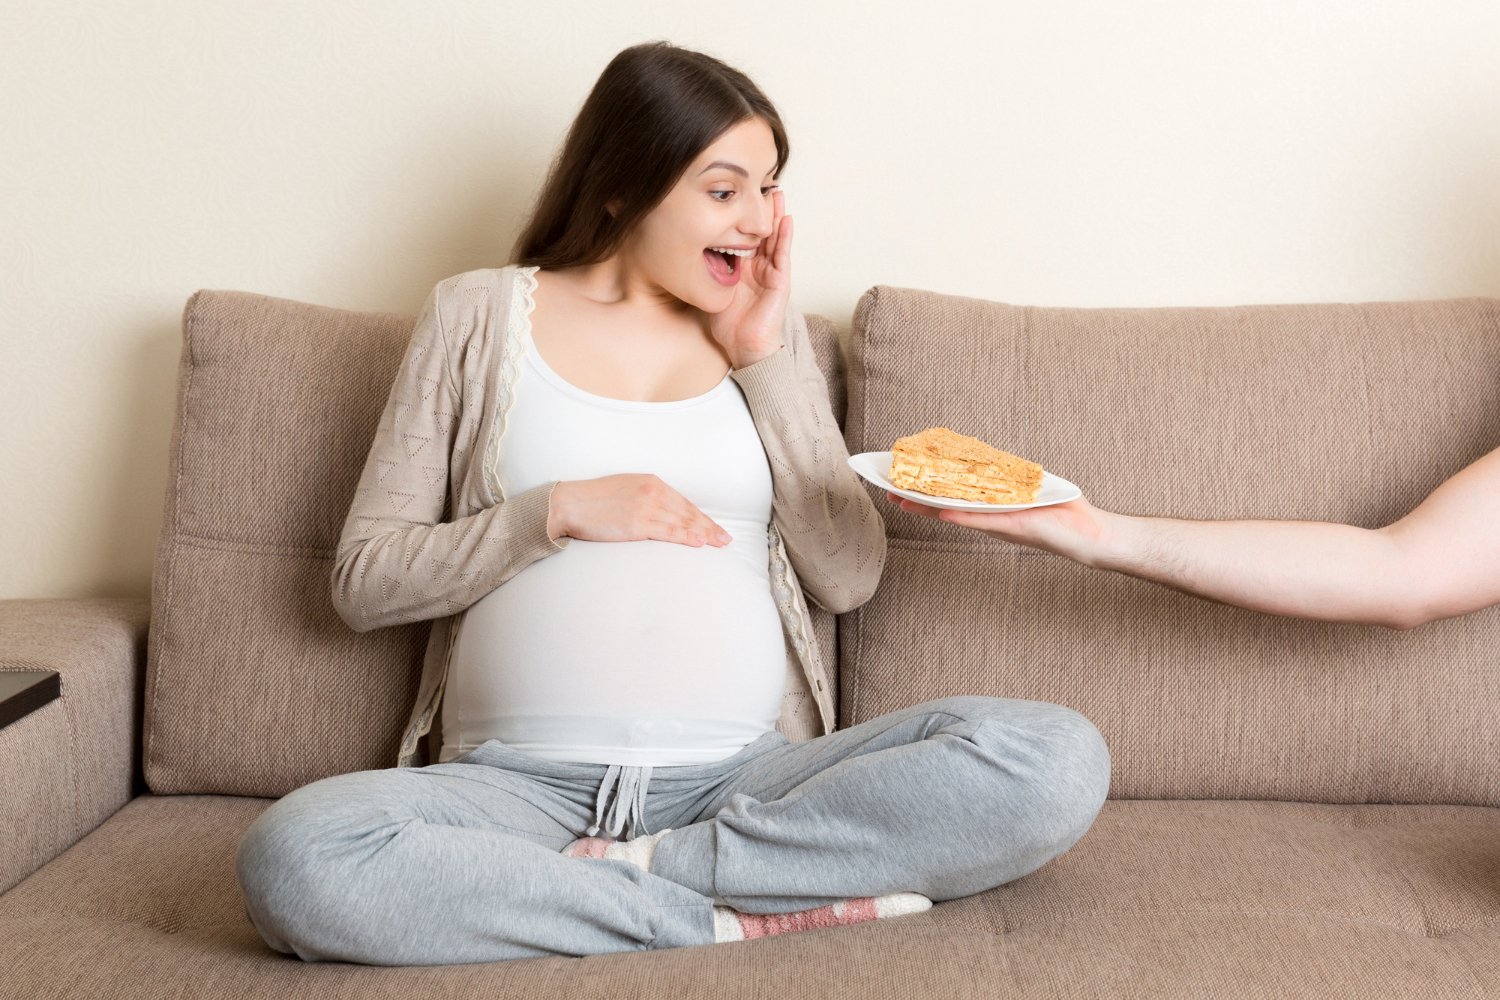 Pregnancy Cravings: Tips for Balancing Nutrition and Satisfaction